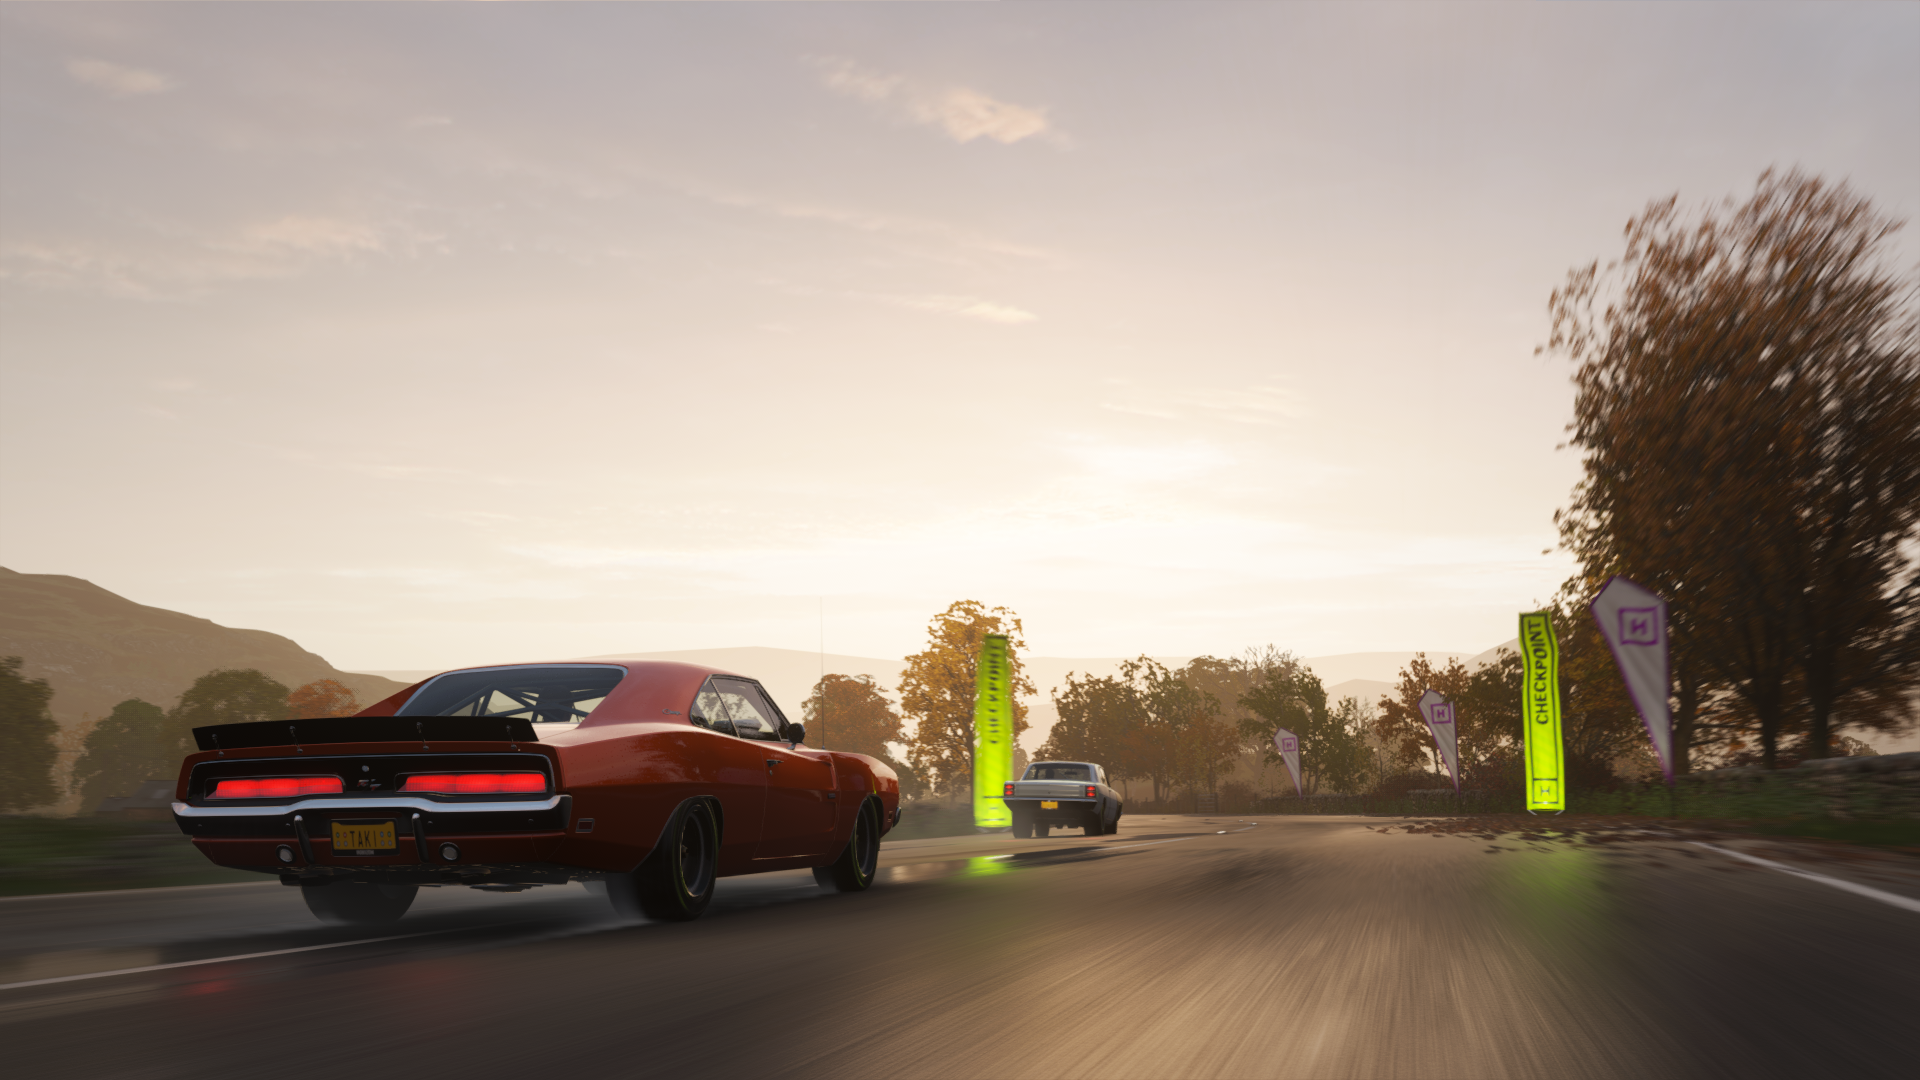 General 1920x1080 Forza Horizon 4 car racing Dodge Dodge Charger muscle cars V8 engine American cars video games Turn 10 Studios PlaygroundGames Xbox Game Studios